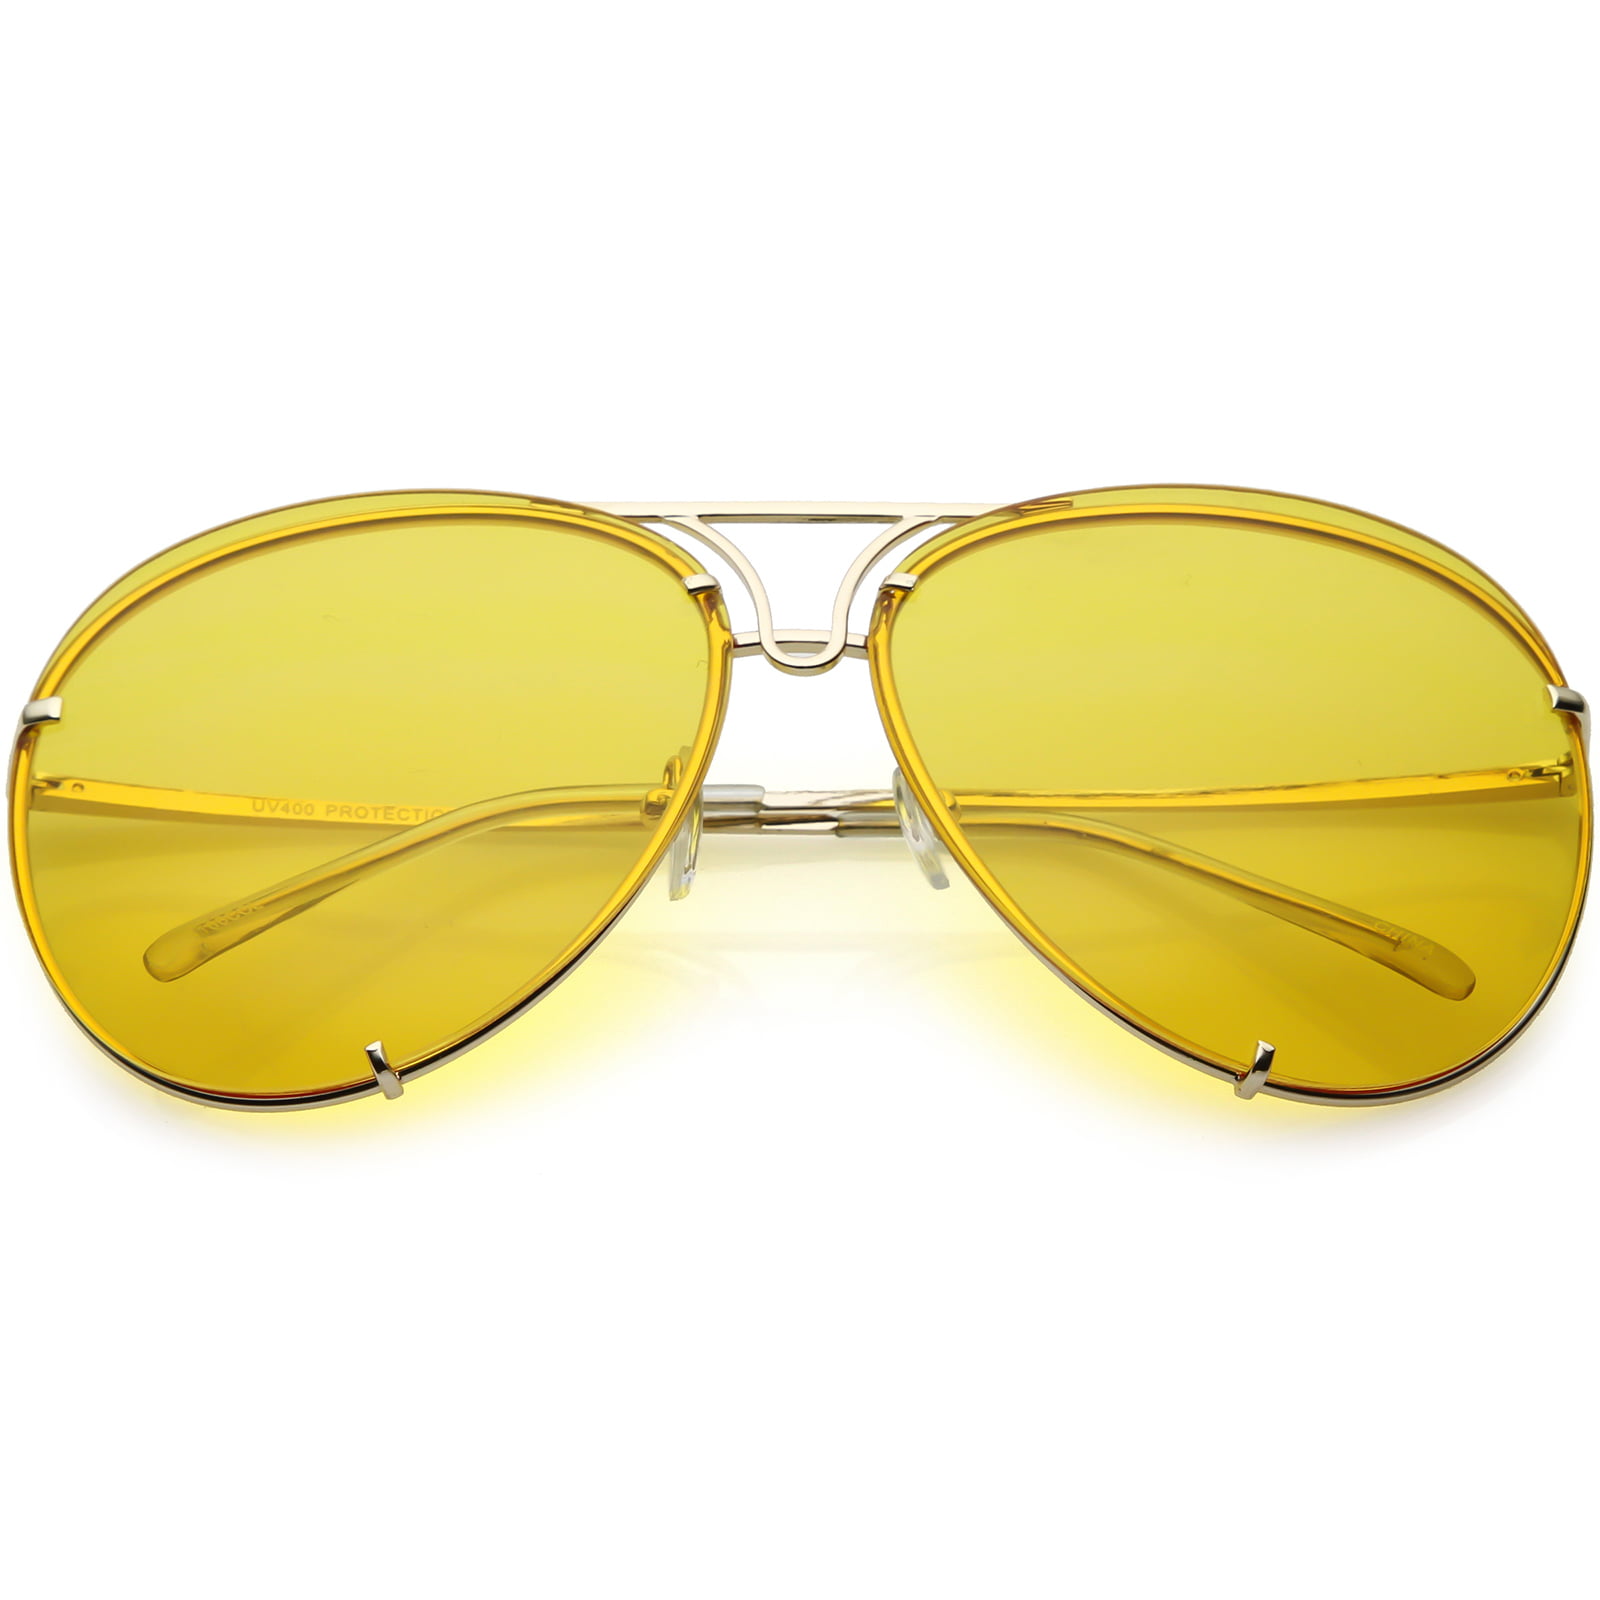 Oversize Rimless Aviator Sunglasses Unique Double Crossbar Color Tinted Lens 69mm Gold Yellow